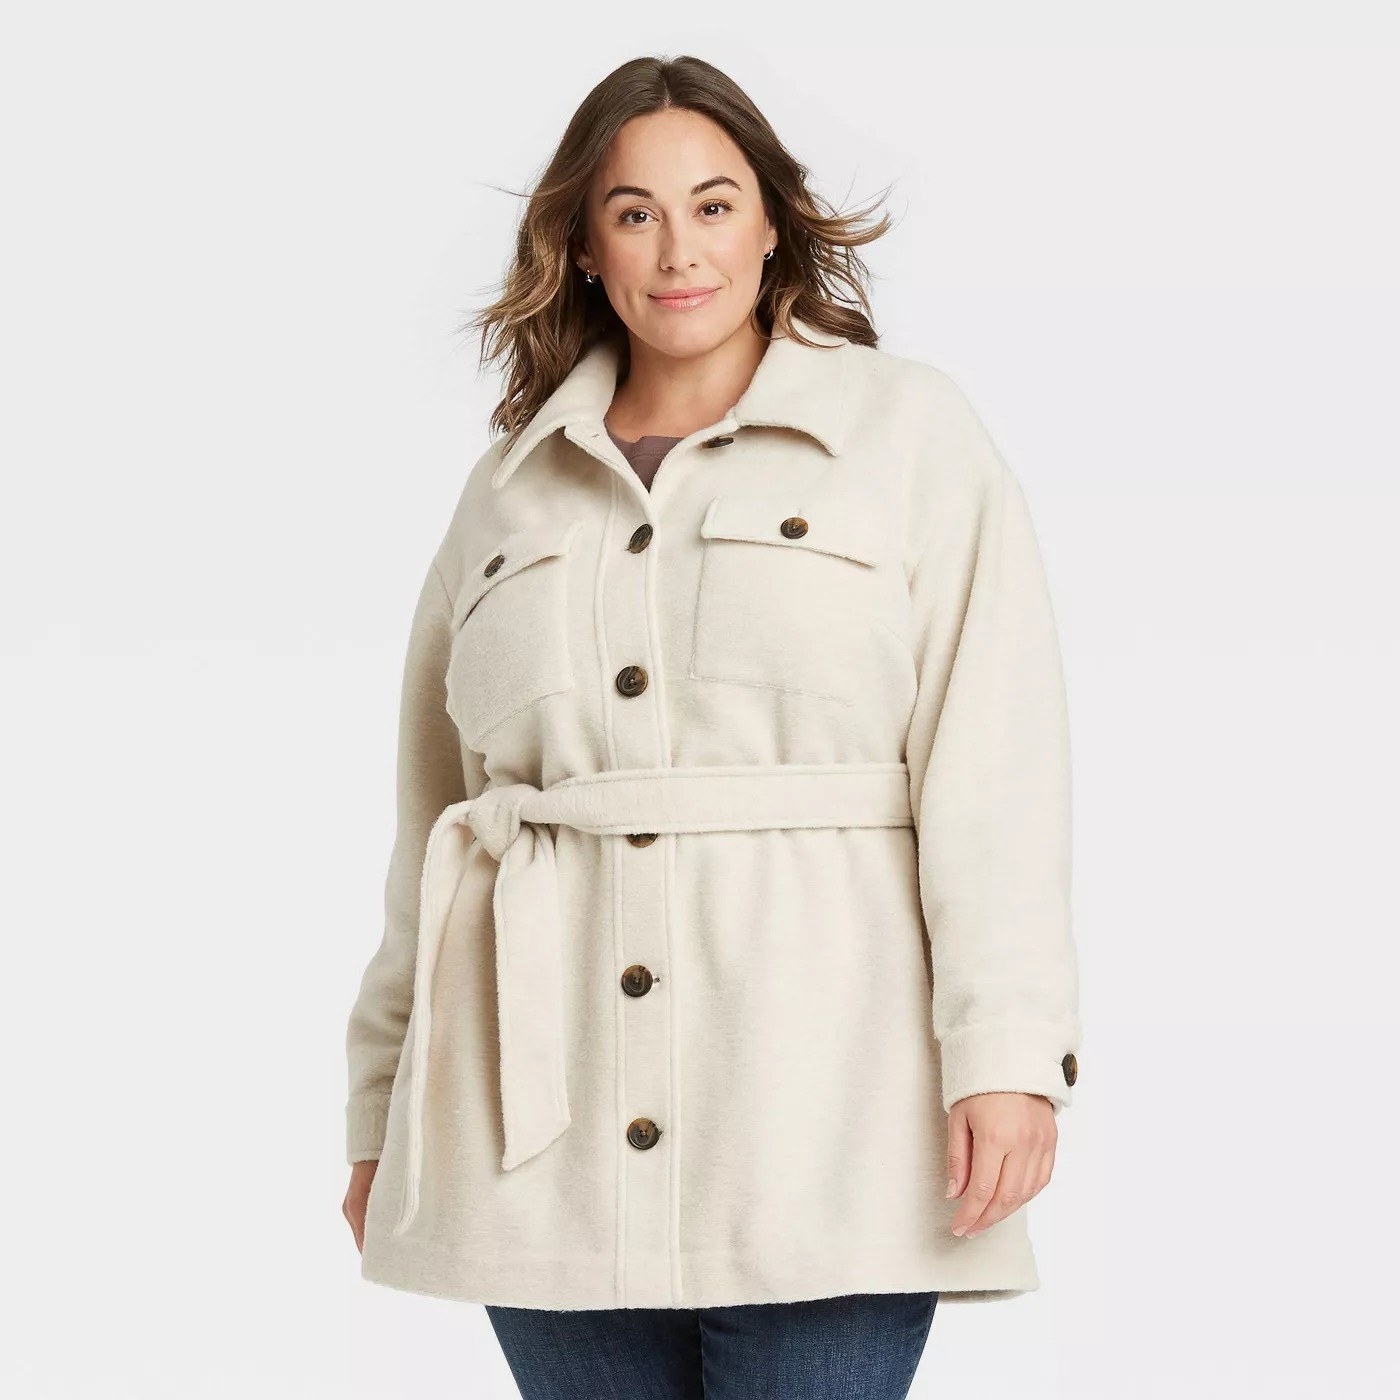 Model wearing cream colored jacket with brown buttons